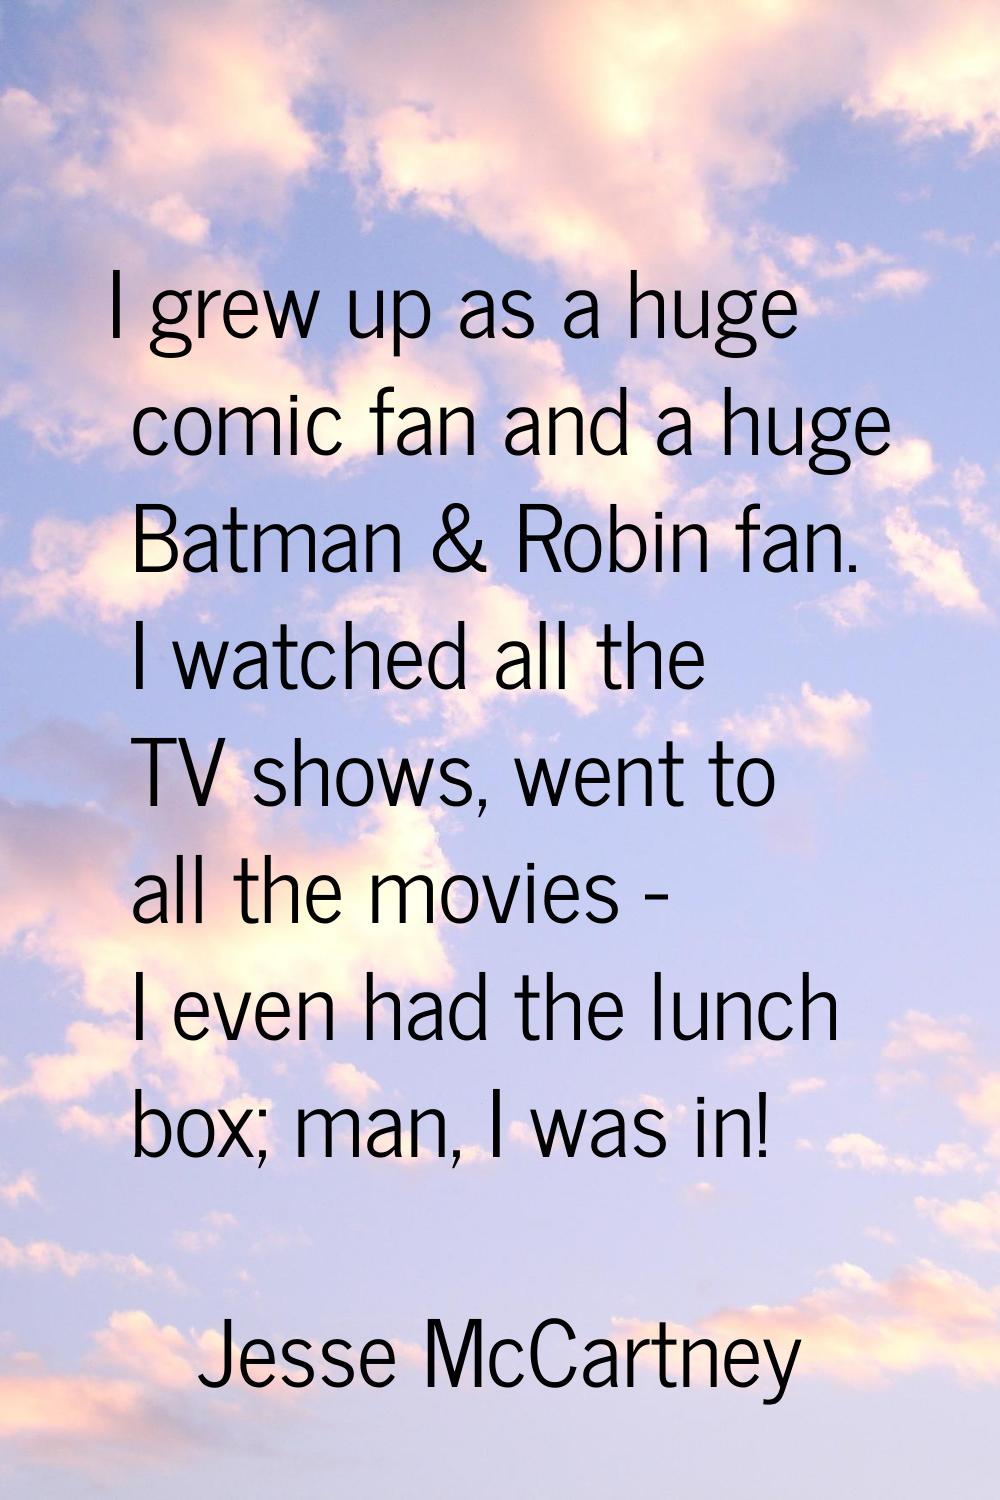 I grew up as a huge comic fan and a huge Batman & Robin fan. I watched all the TV shows, went to al